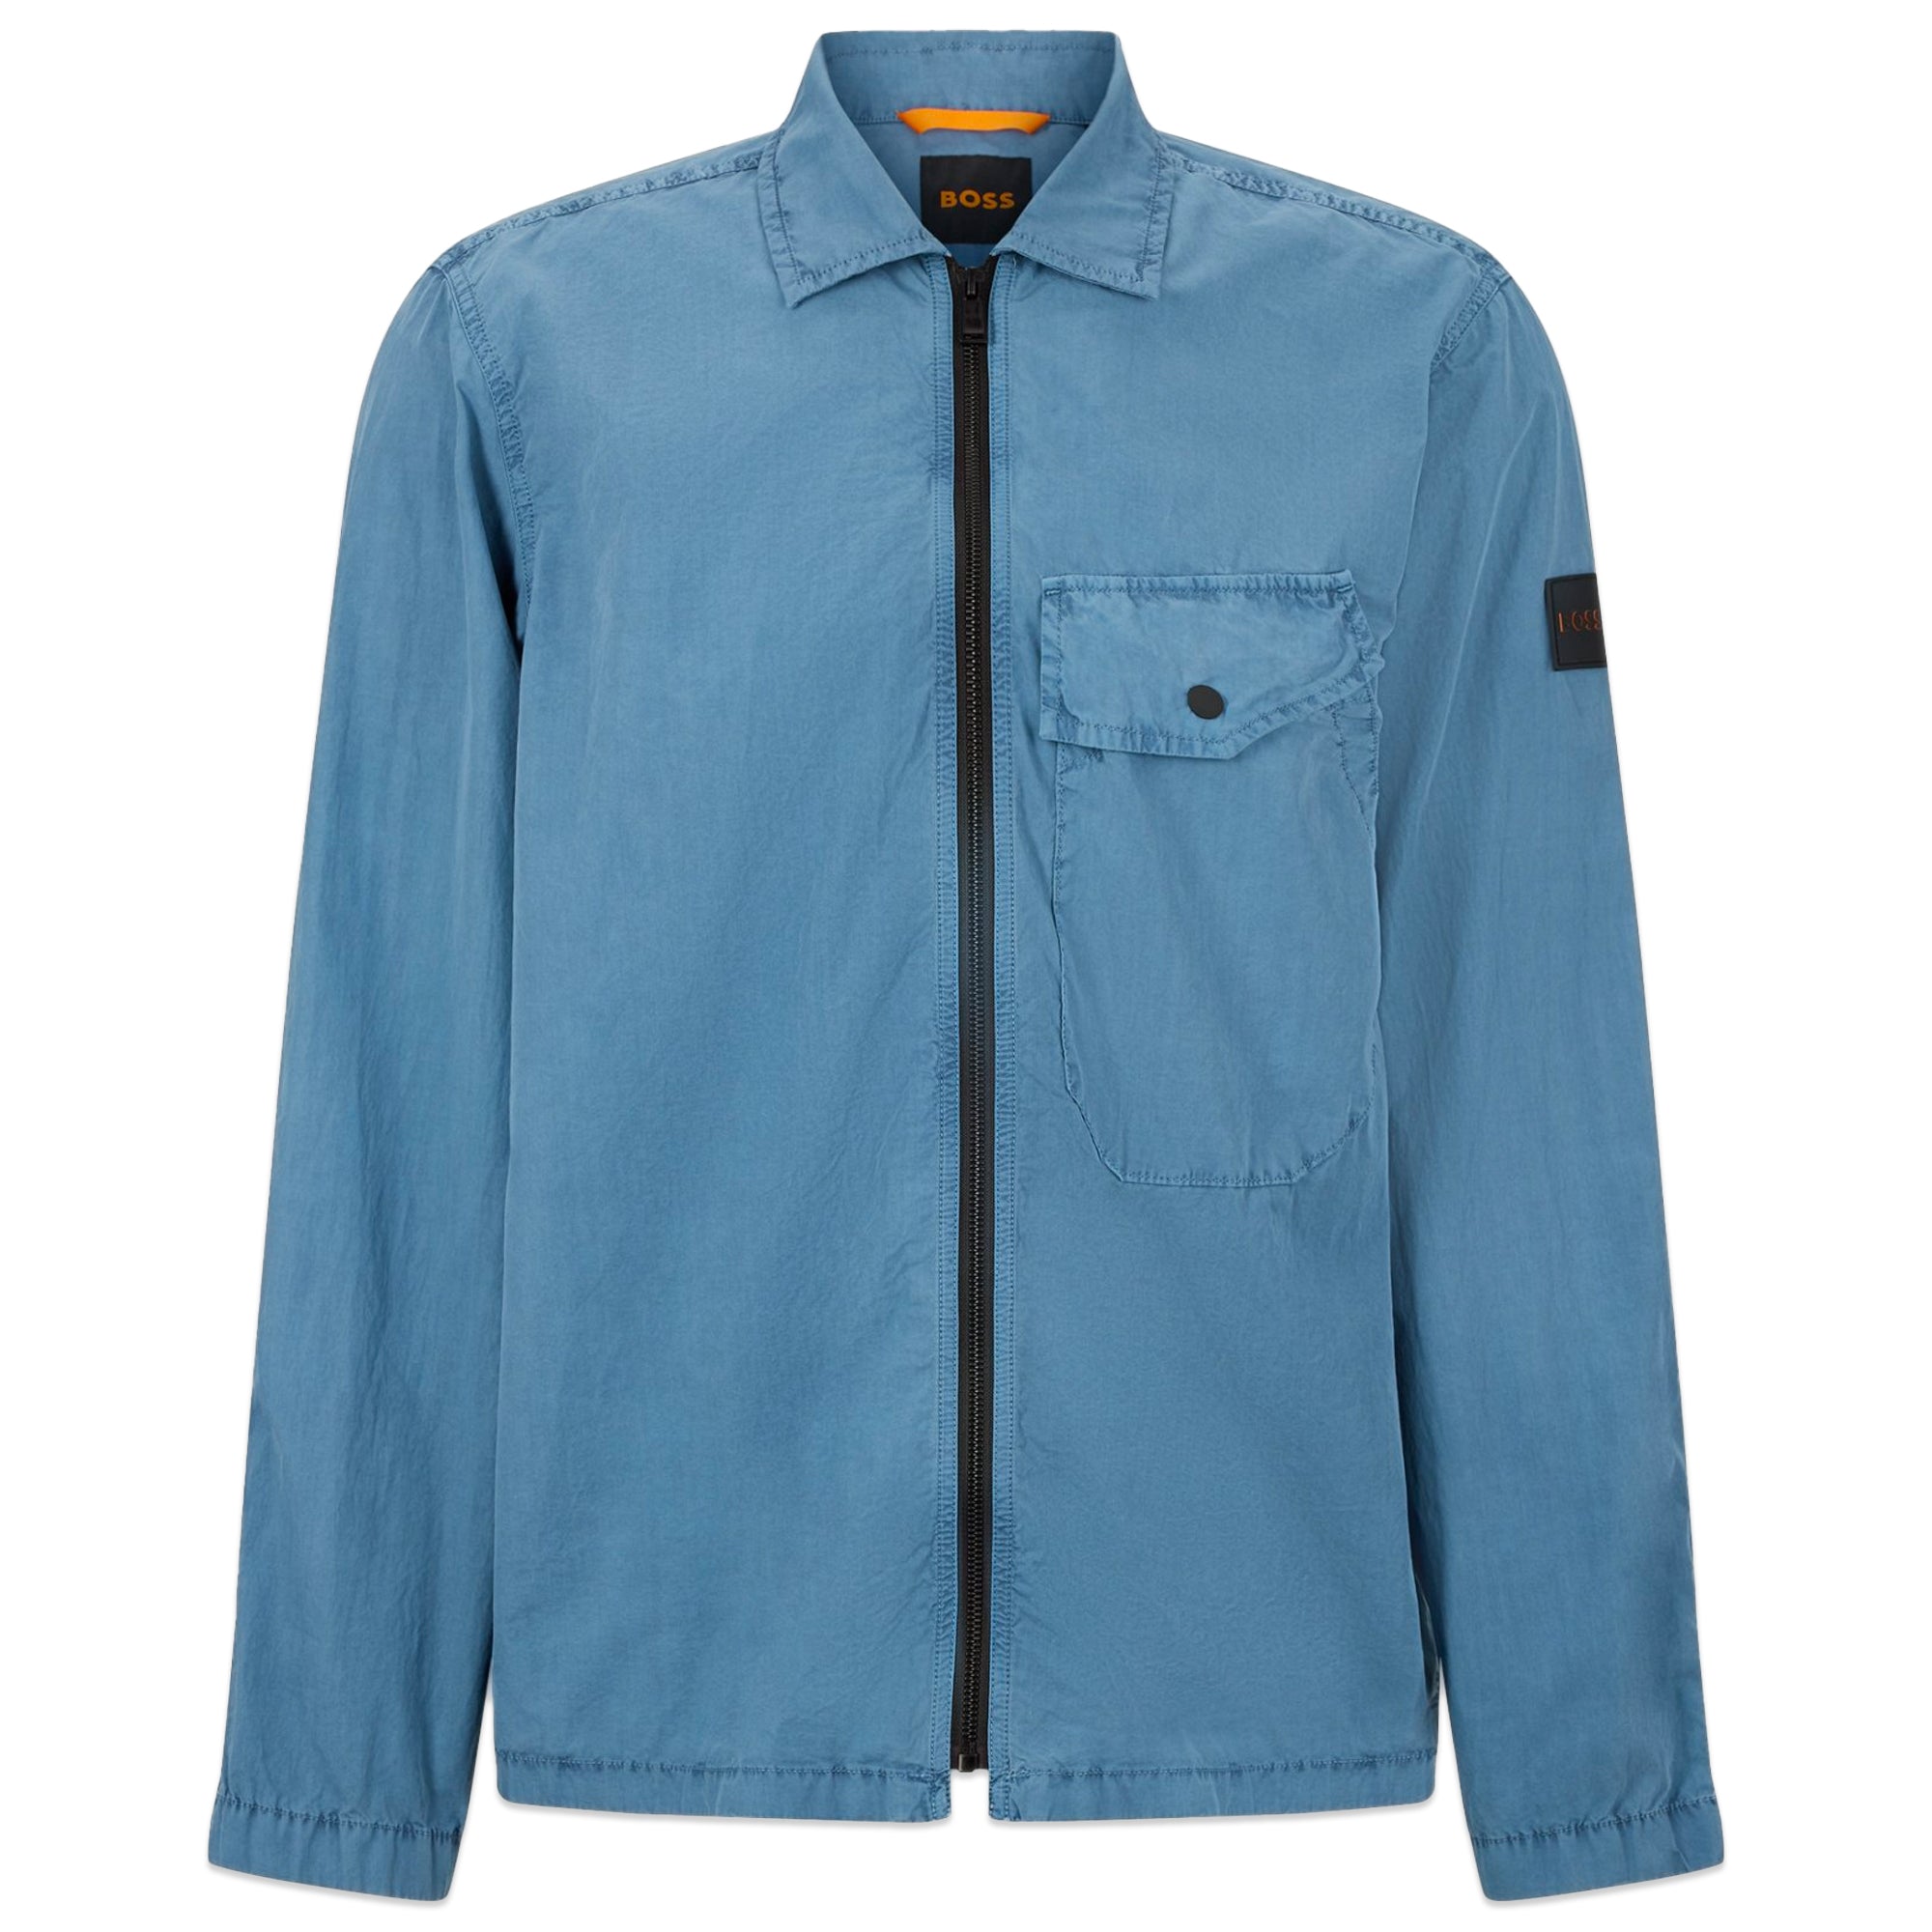 Boss Lool 1 Pigment Dyed Overshirt - Airforce Blue